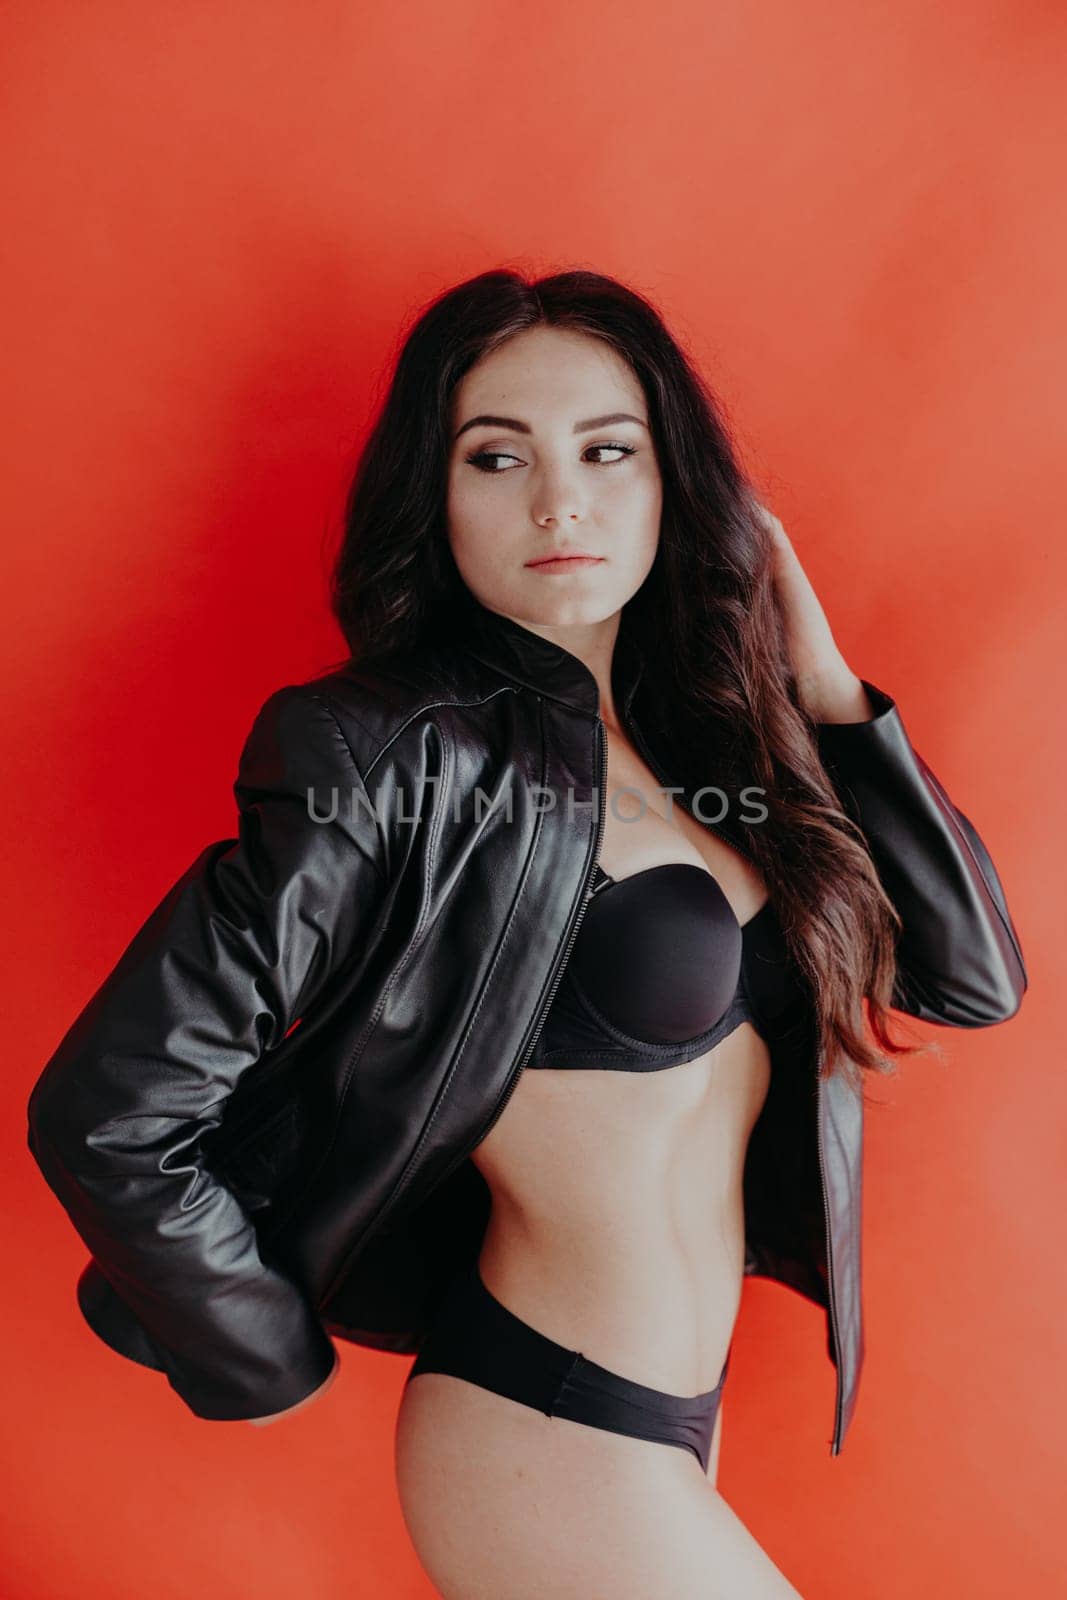 brunette girl in leather jacket and black lingerie on a red background by Simakov